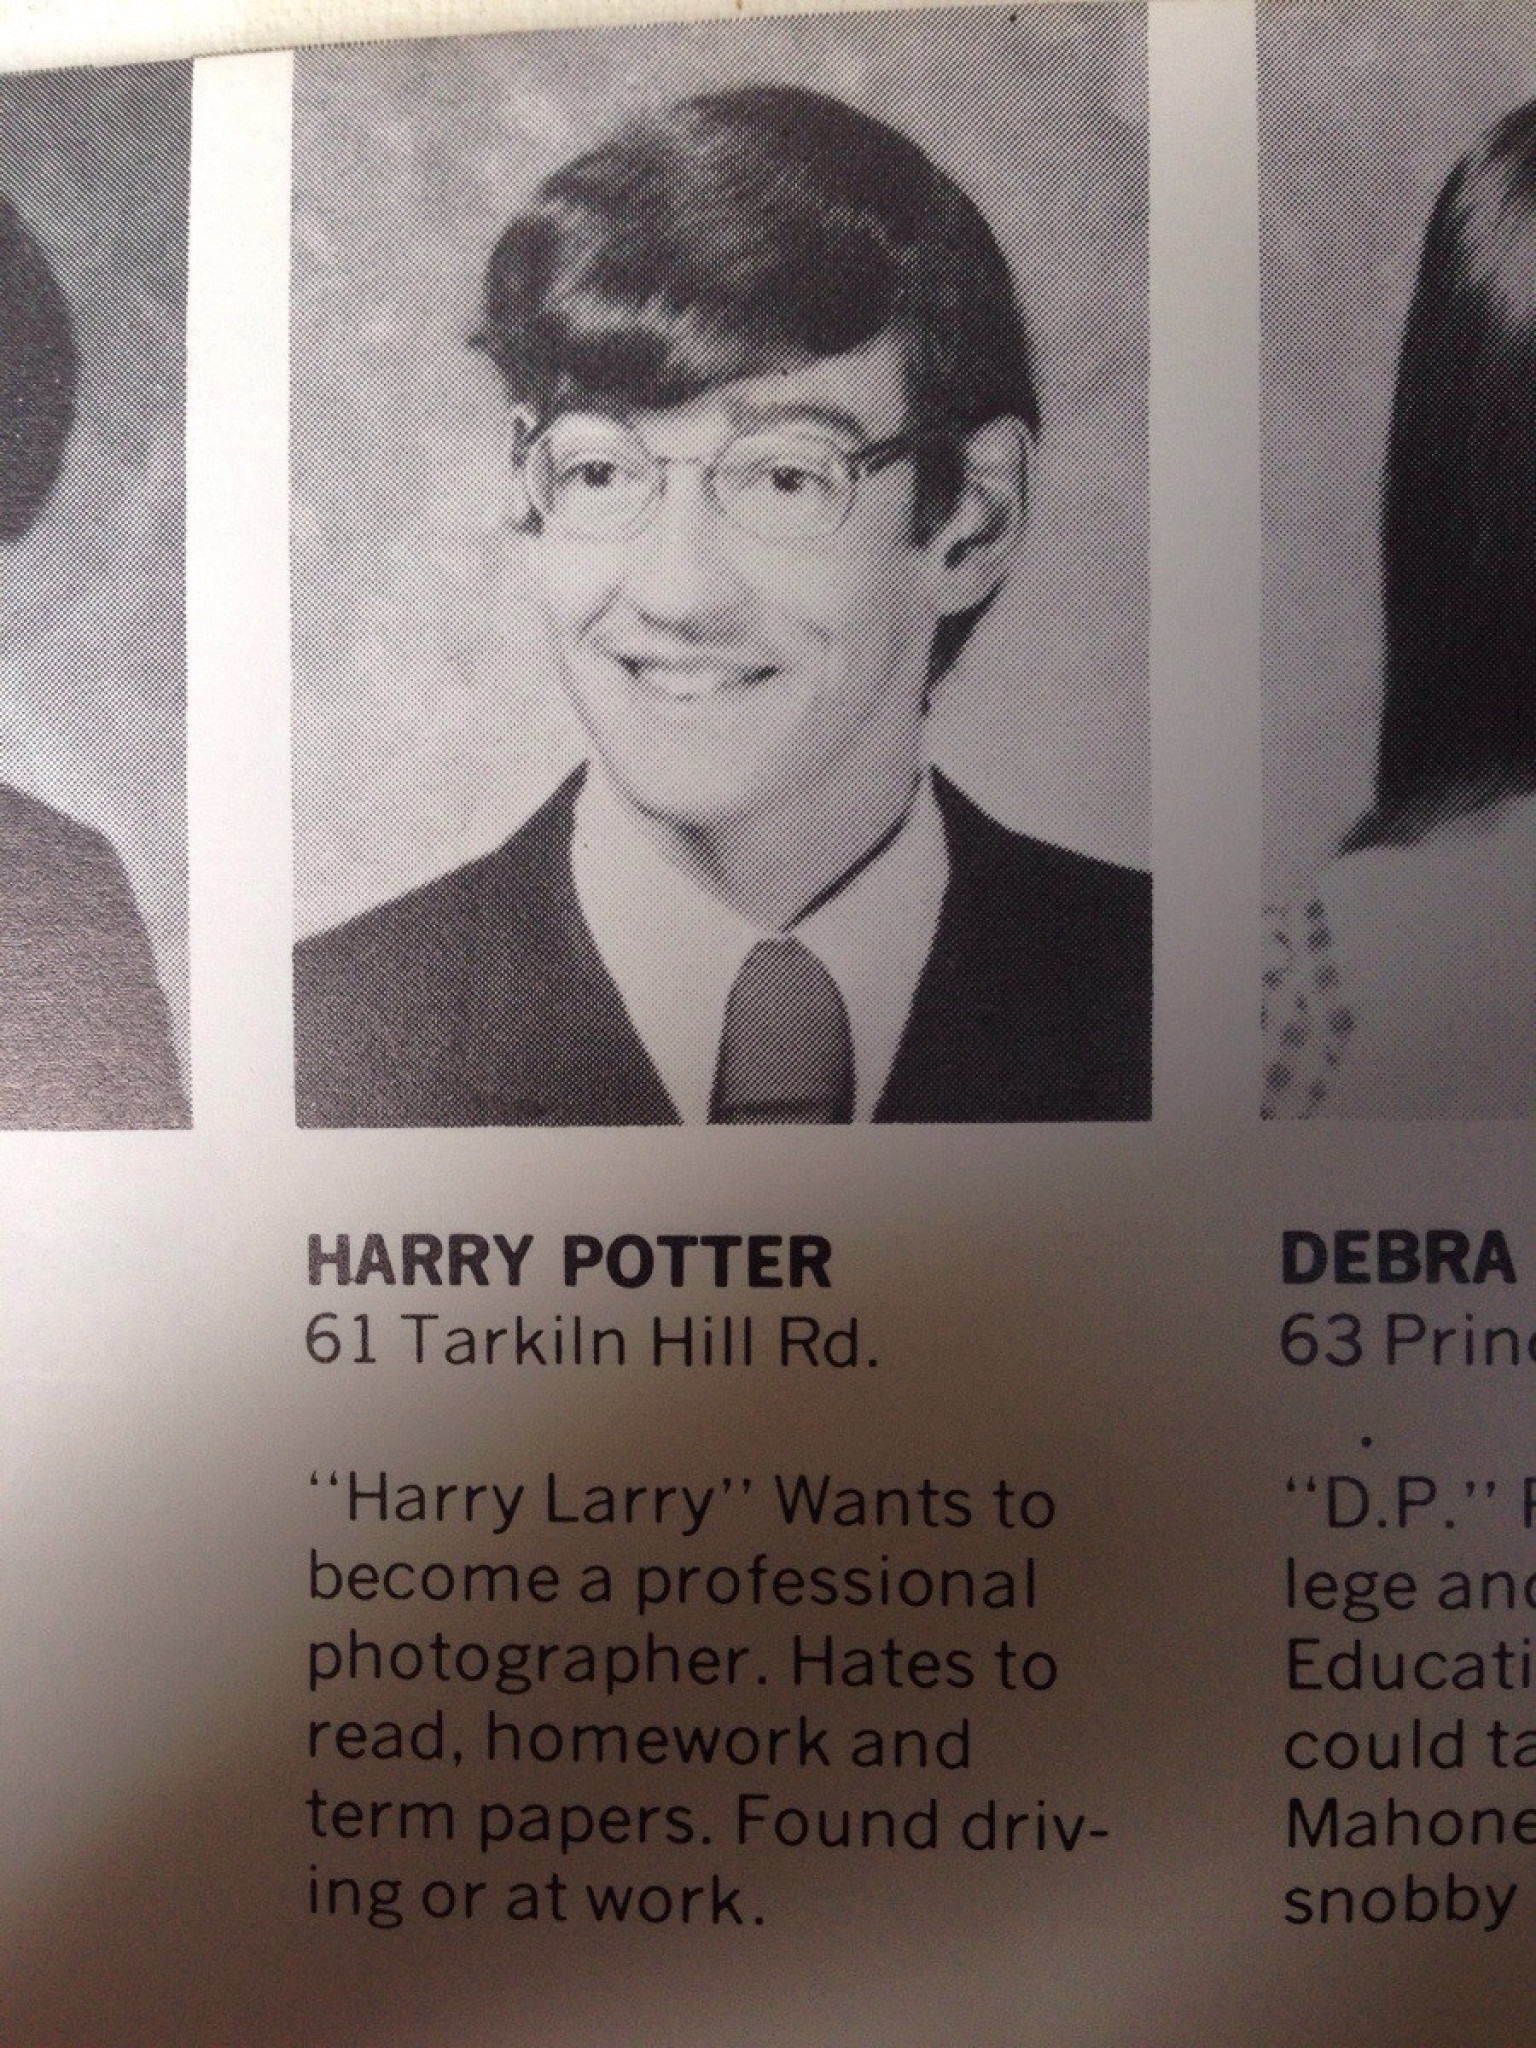 'Harry Potter' Yearbook Photo Is Spitting Image Of Famous Book